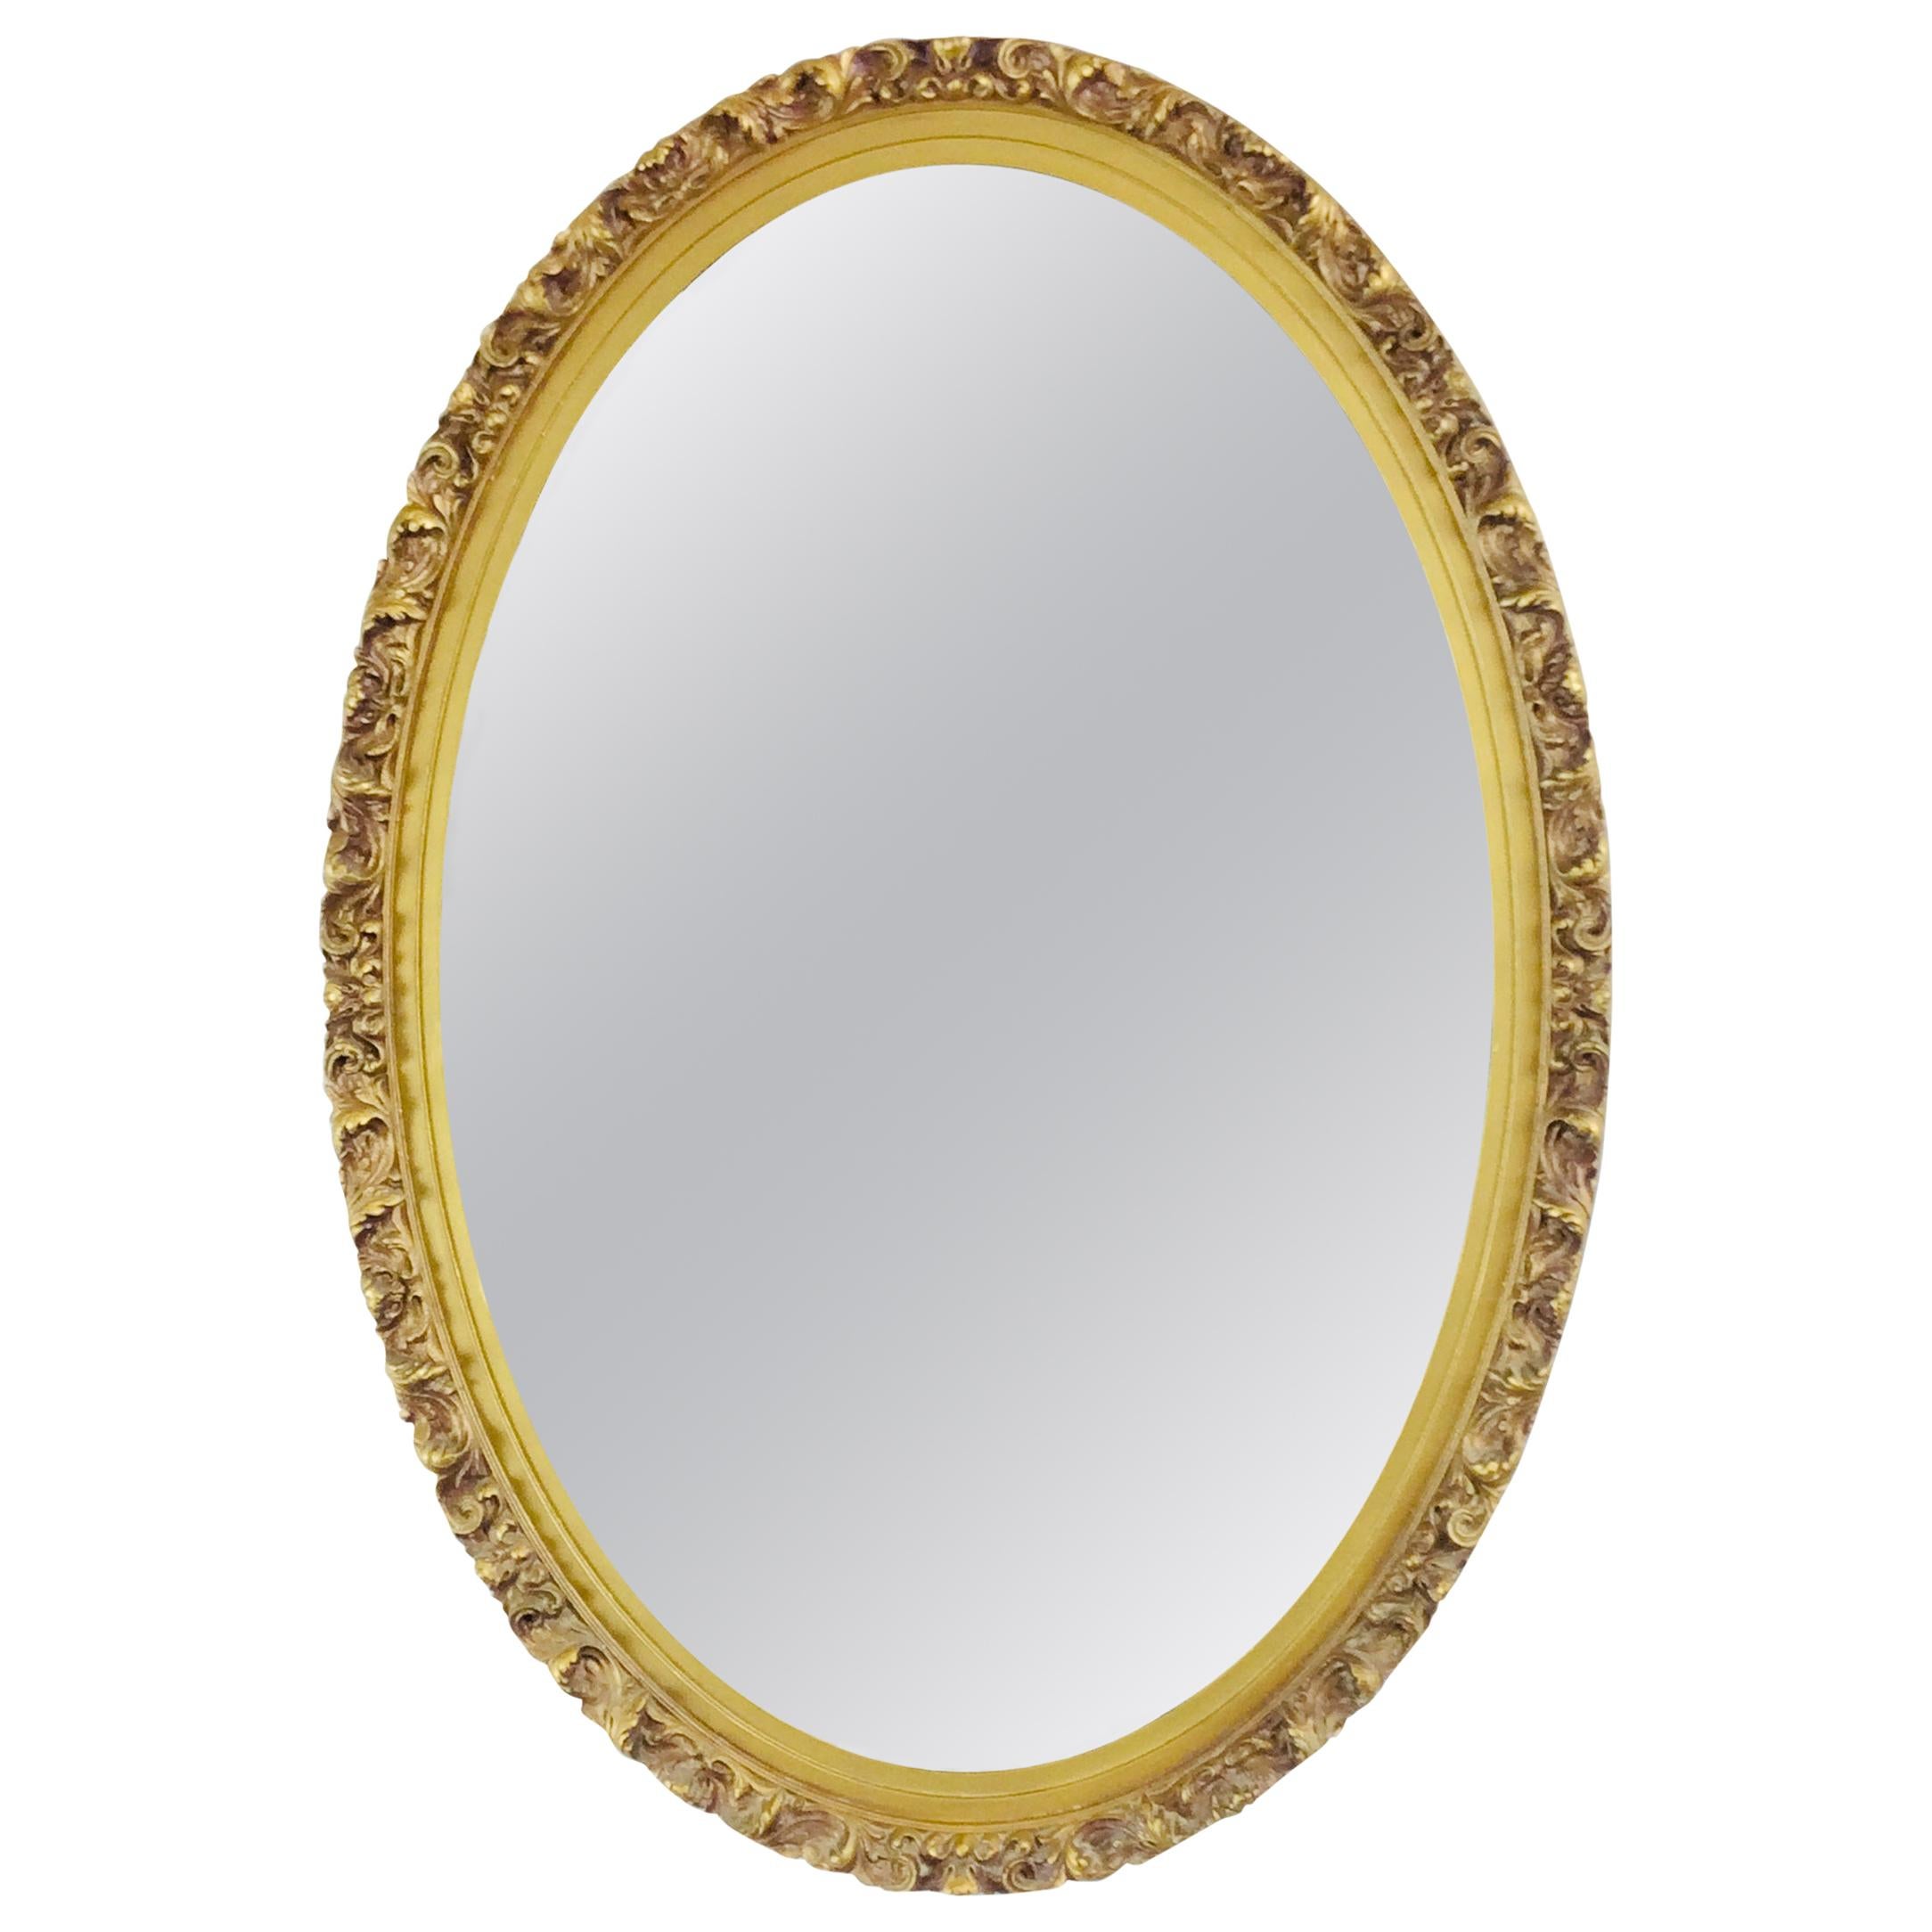 Hollywood Regency Style Floral Oval Gold Framed Wall Mirror